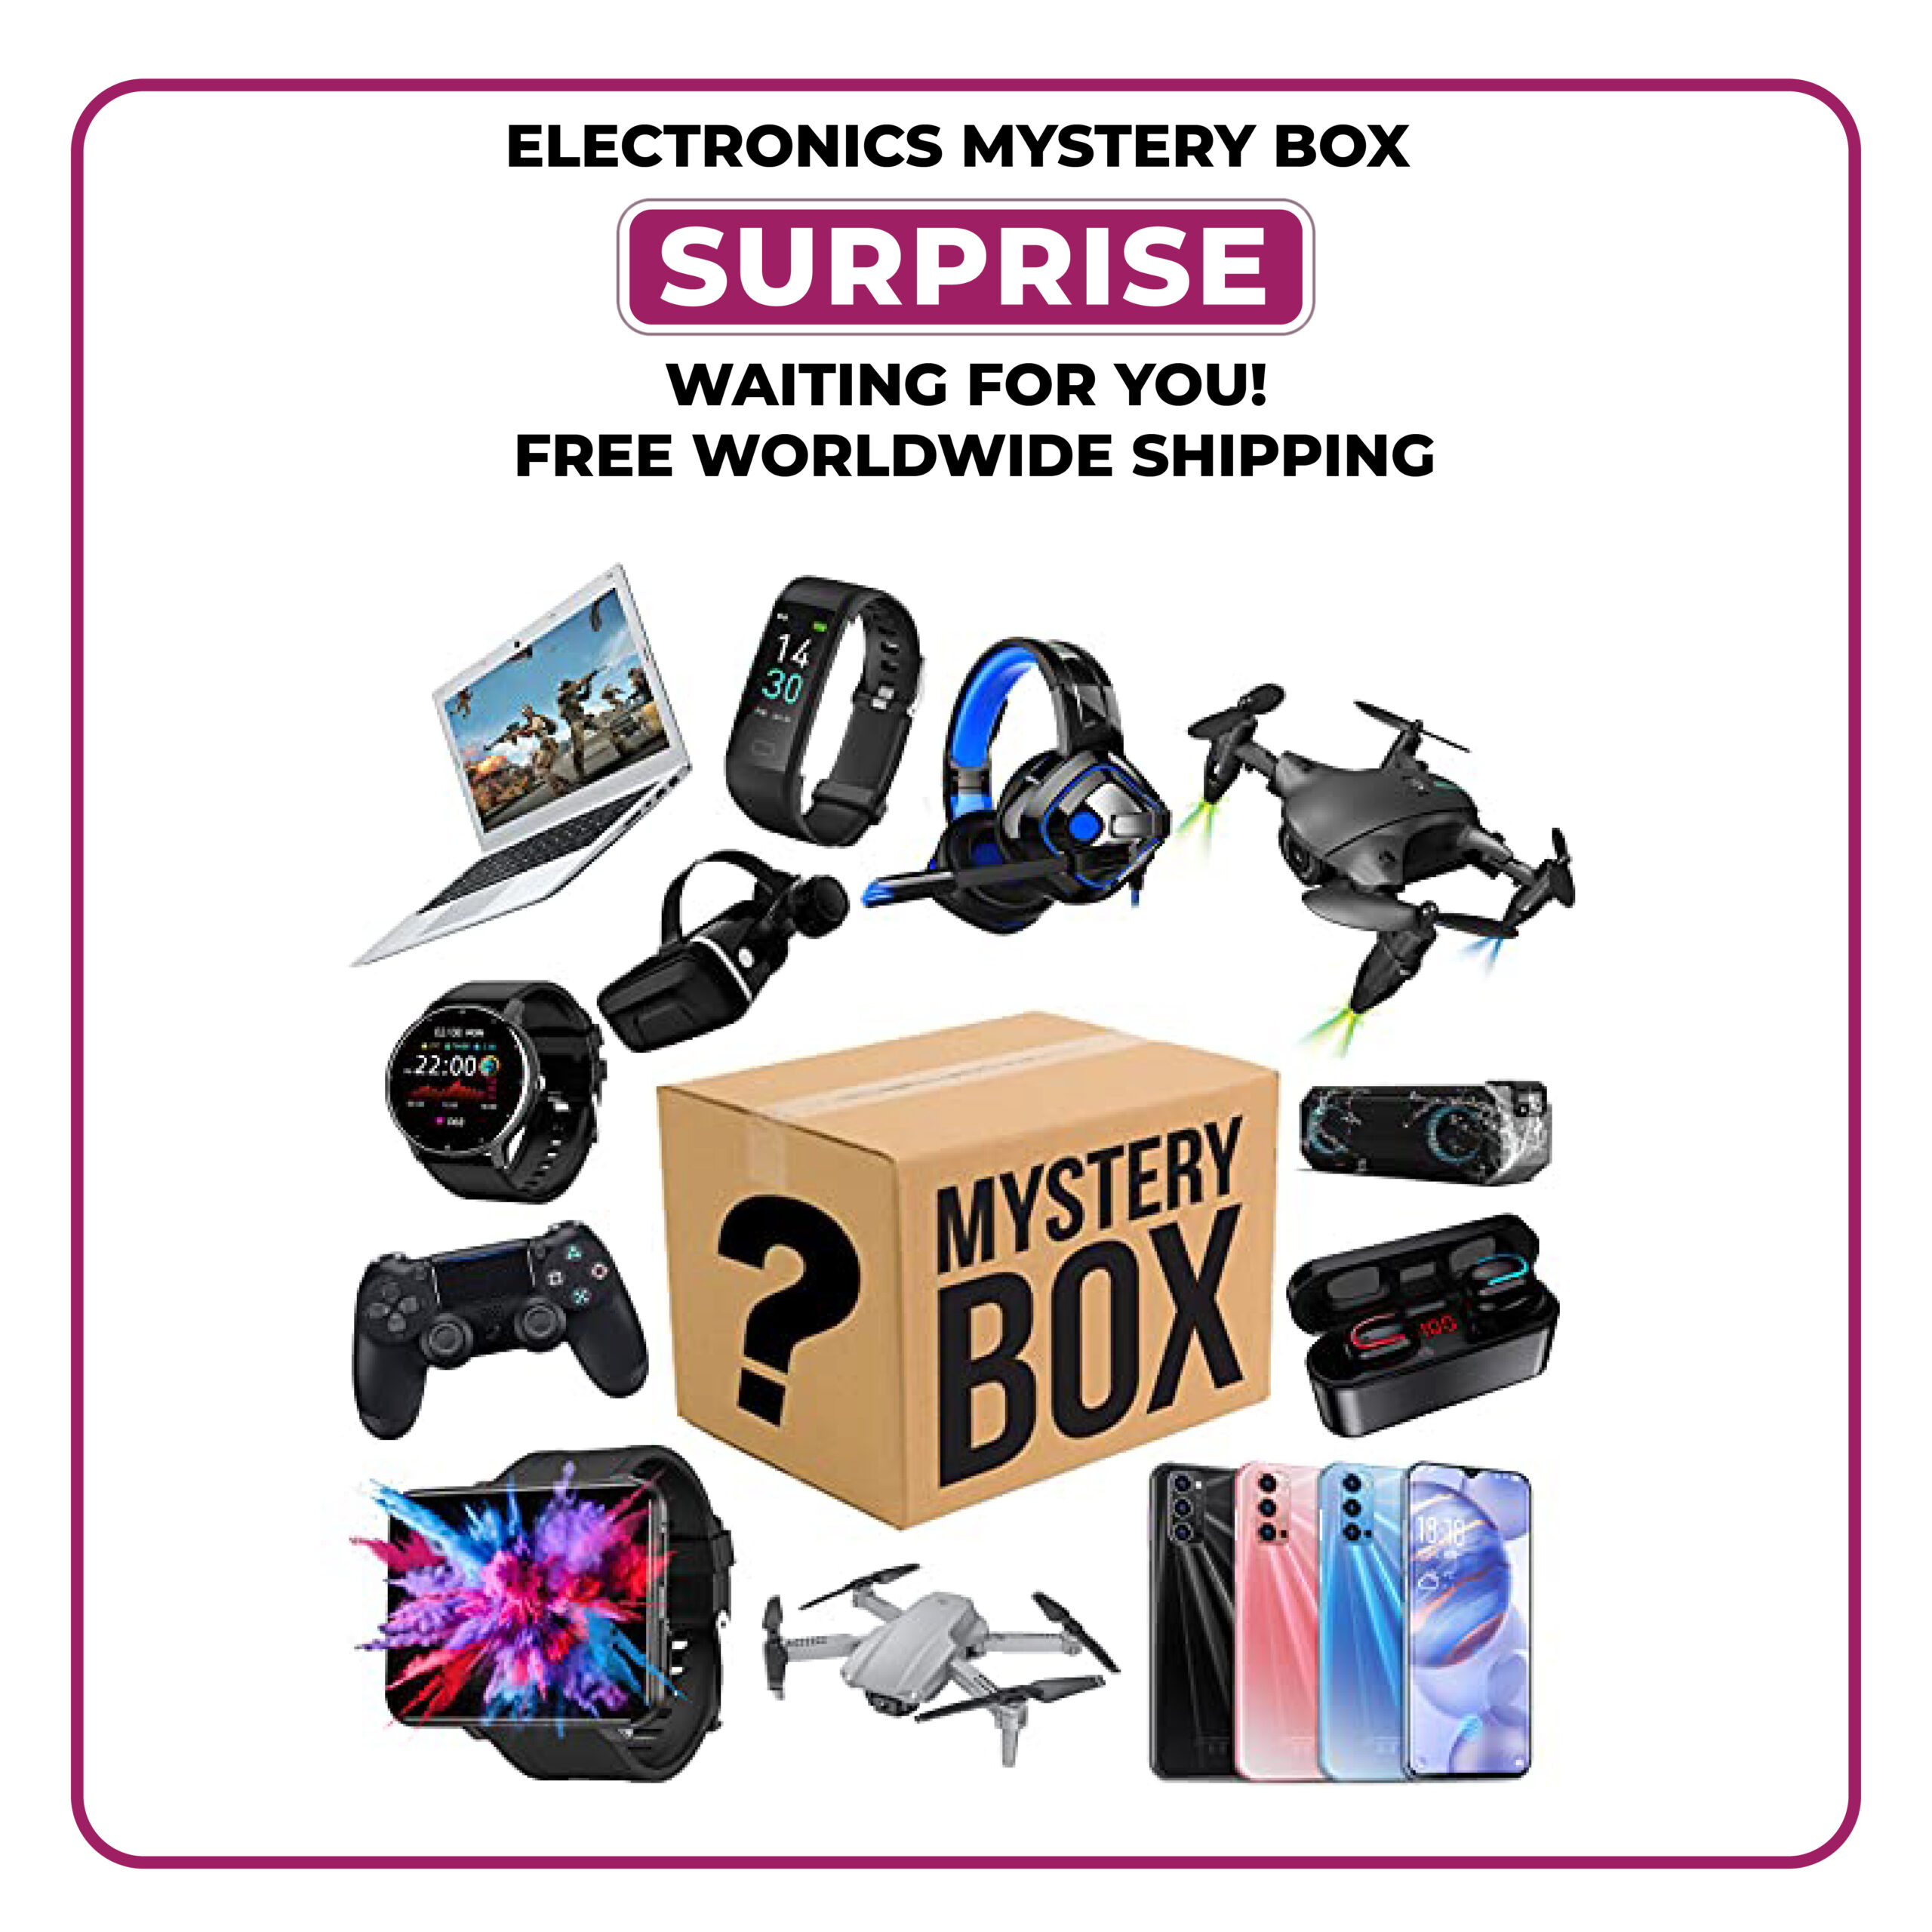 MYSTERY BOX ❗️ ELECTRONICS INCLUDED - Internet & Media